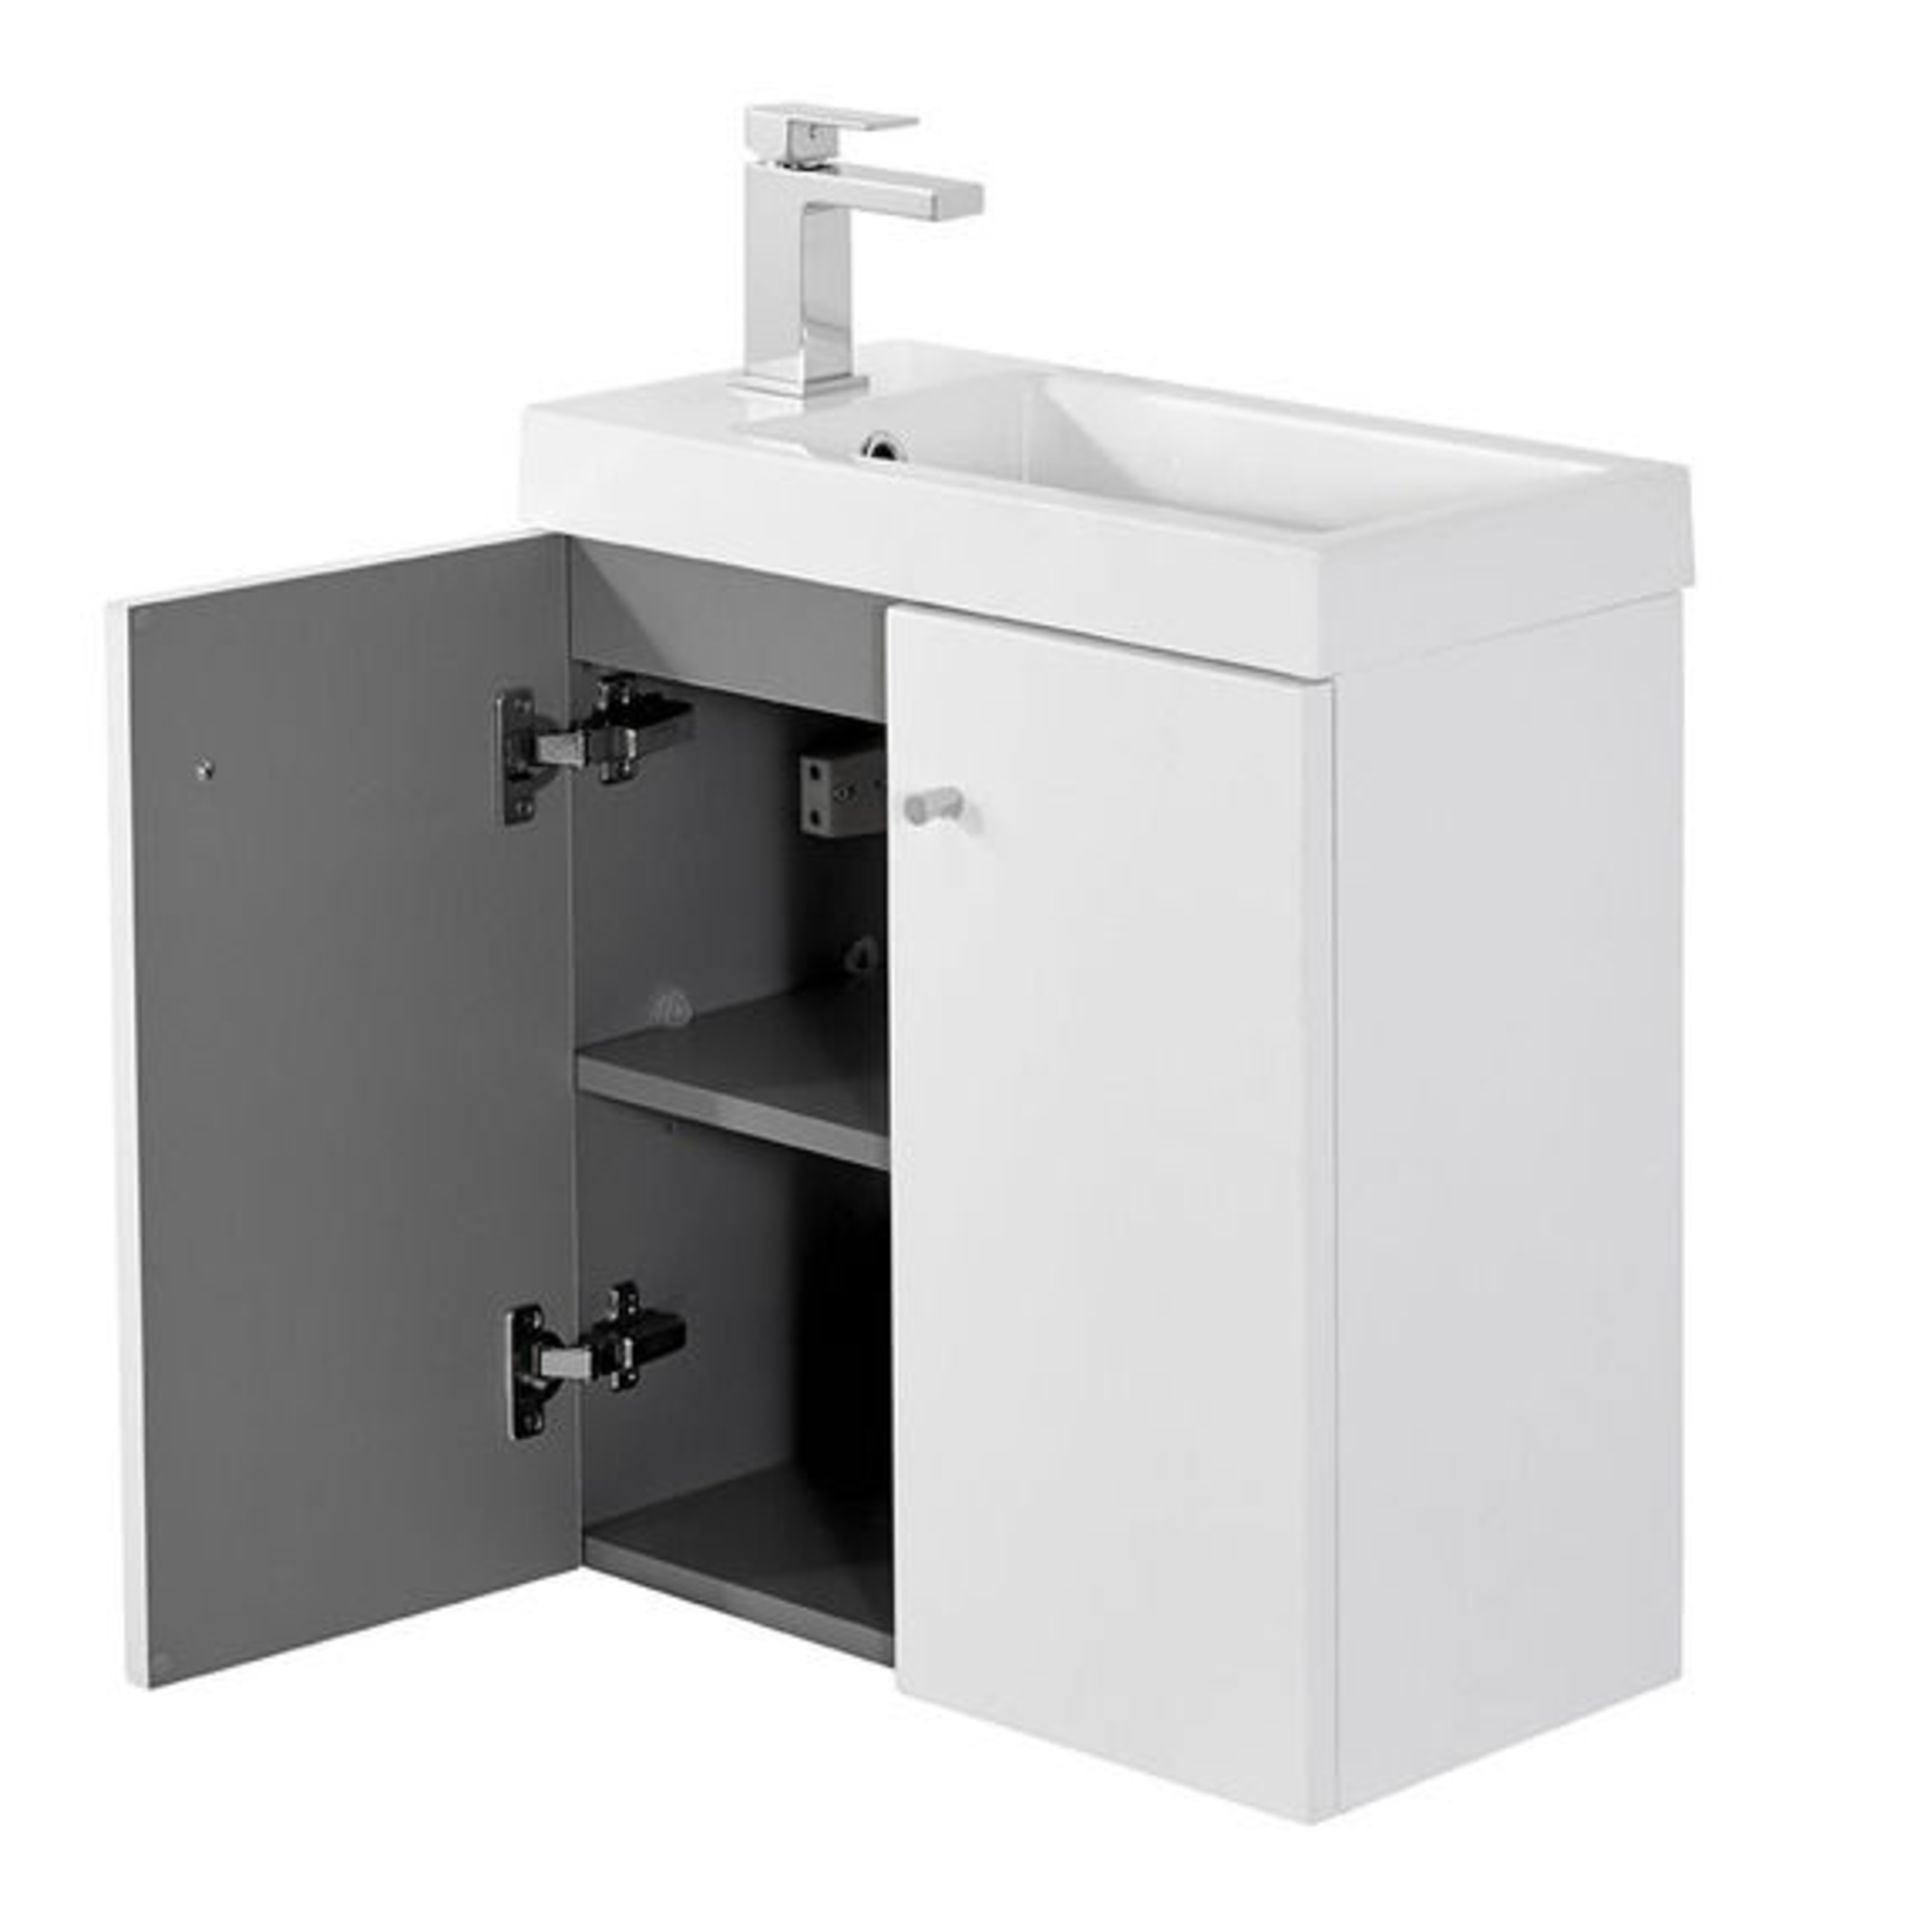 10 x Alpine Duo 495 Wall Hung Vanity Unit  - Gloss White - Brand New Boxed Stock - Dimensions: W49.5 - Image 5 of 5